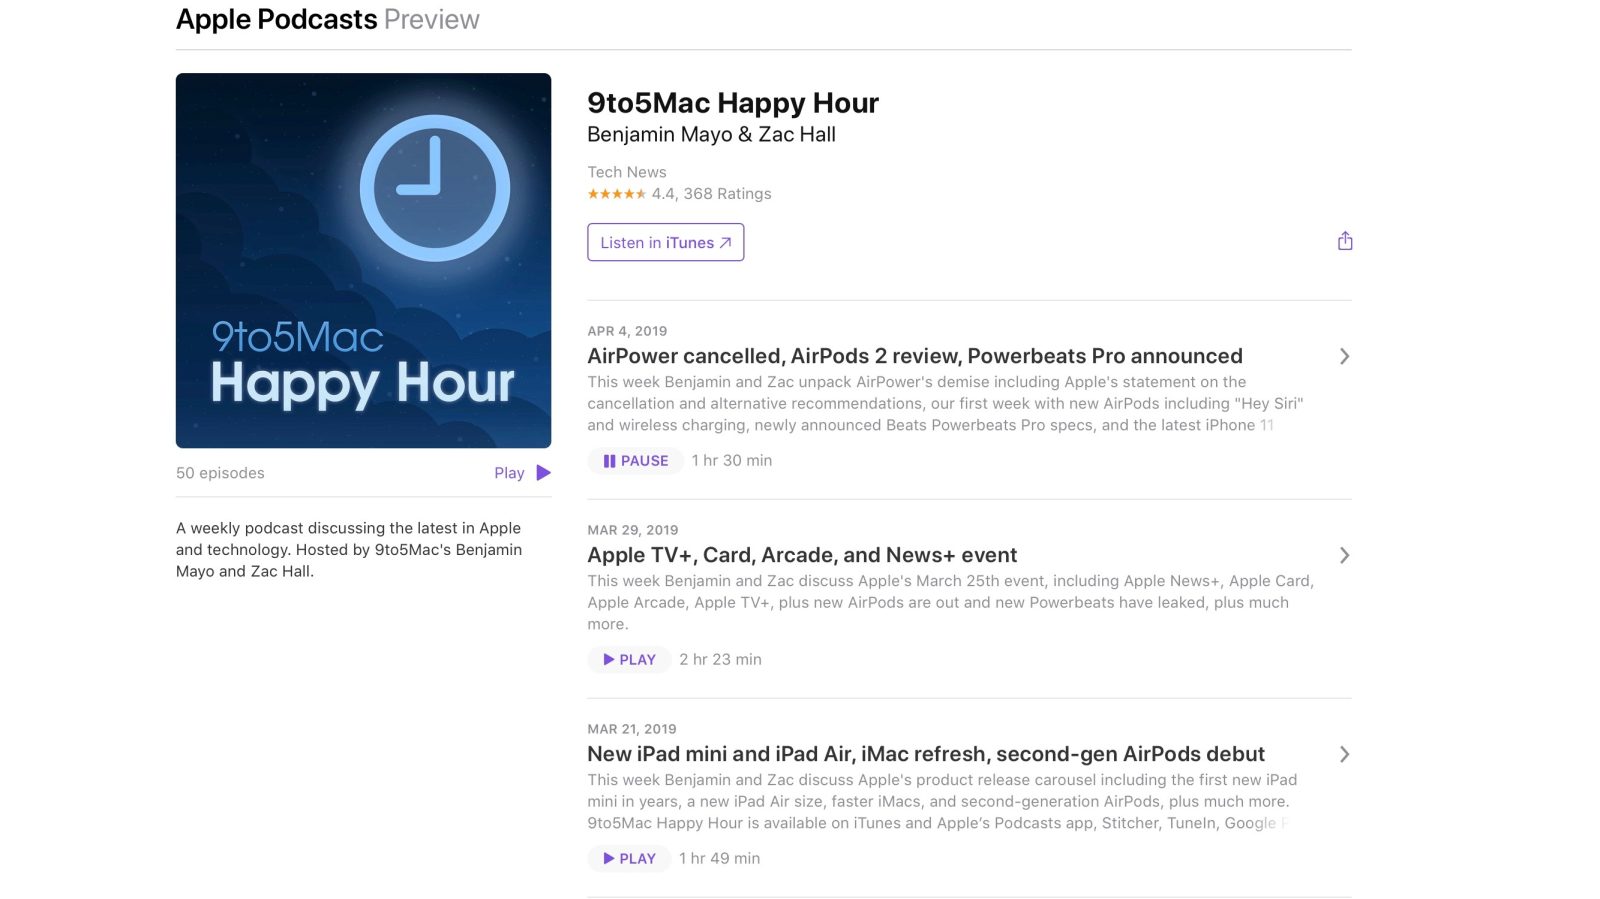 Techmeme Apple Podcasts On The Web Gets An Overhaul With A New